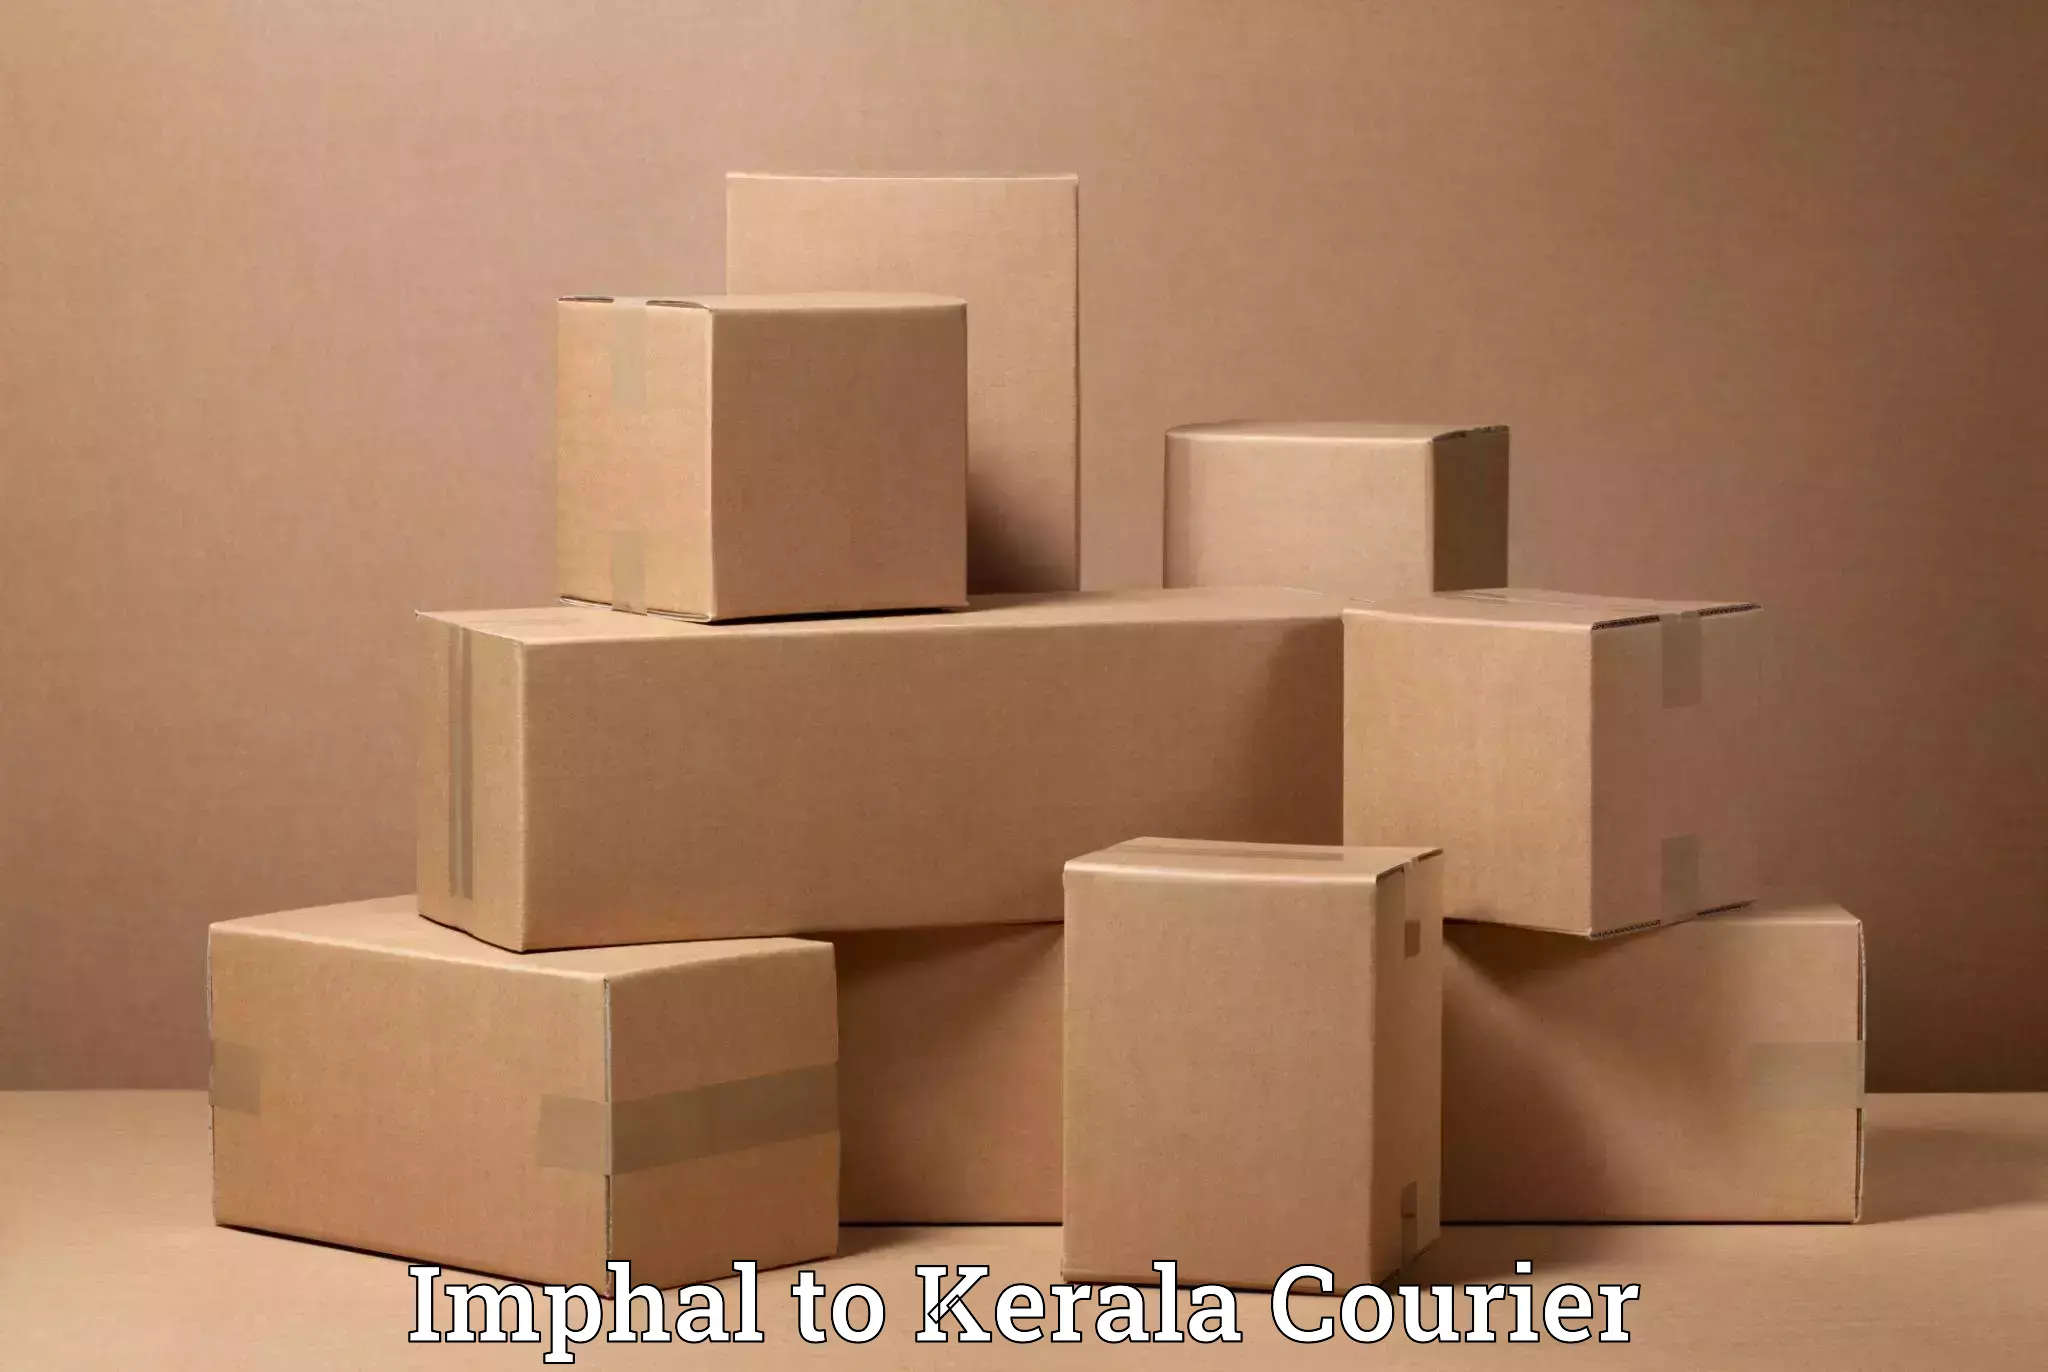 Furniture delivery service Imphal to Thodupuzha